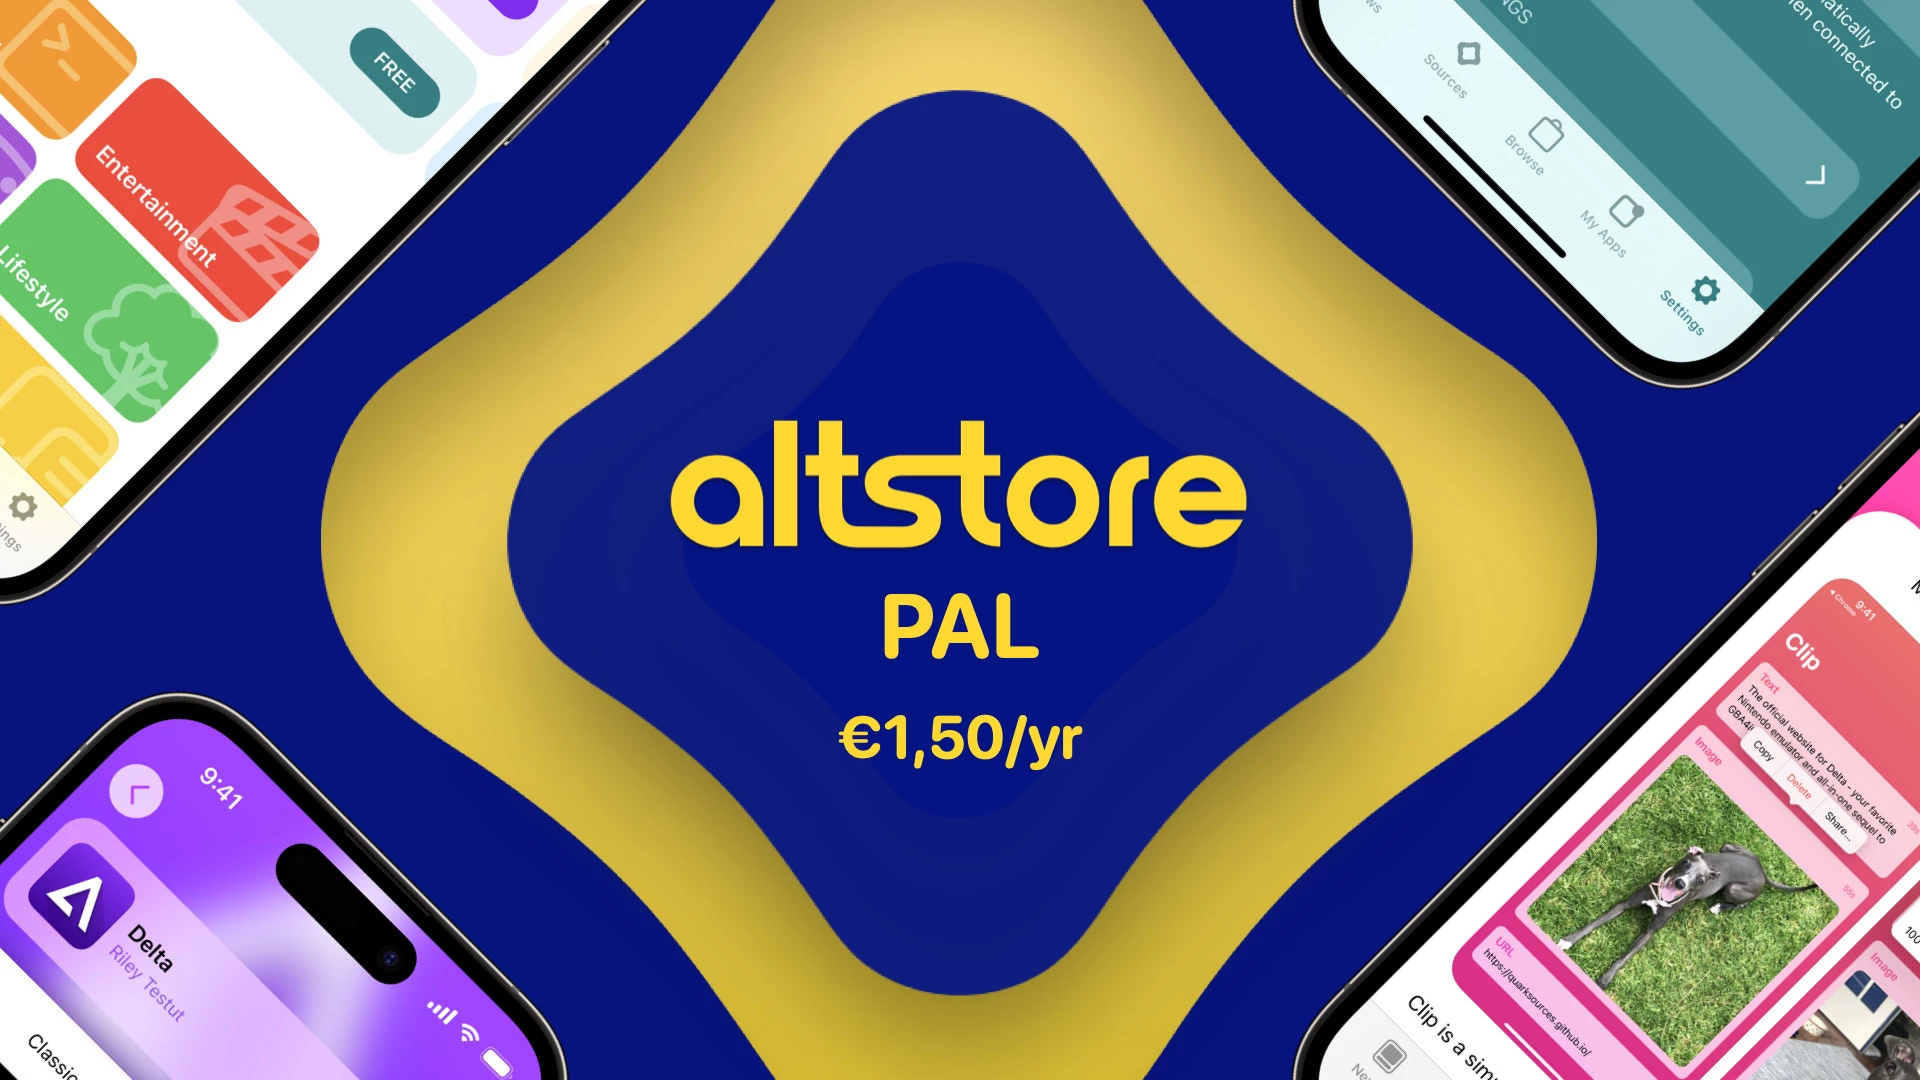 Third-party iPhone app store AltStore PAL is now live in Europe - The Verge